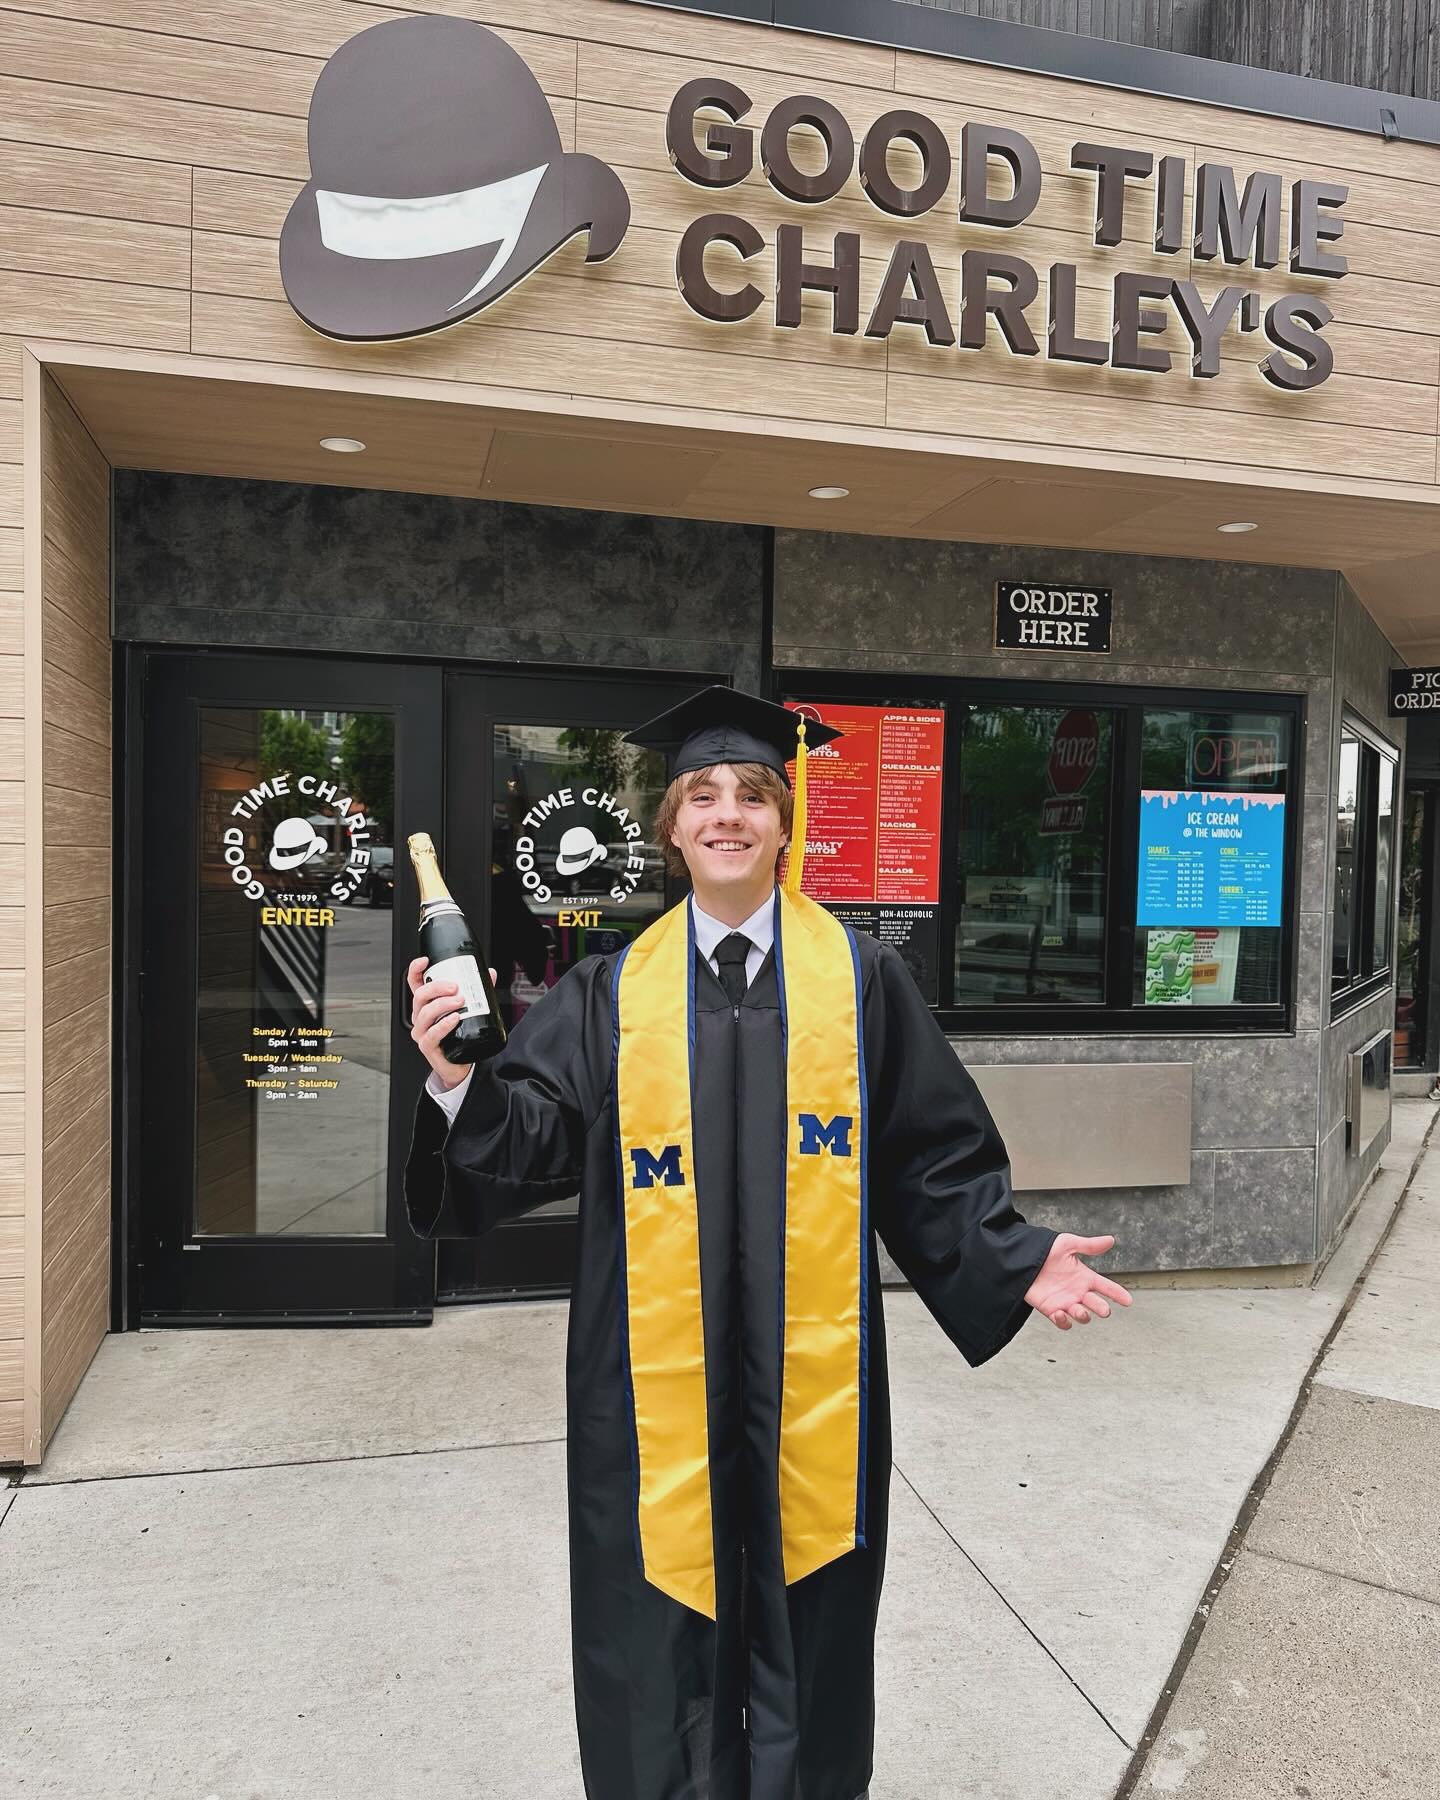 Congrats to all of the grads this weekend! 🎓

Special s/o to the Charley&rsquo;s graduating crew! Highlight goes to Max: He graduated with a degree in economics and has been working with us for about a year! 

Cheers to class of &lsquo;24🍾